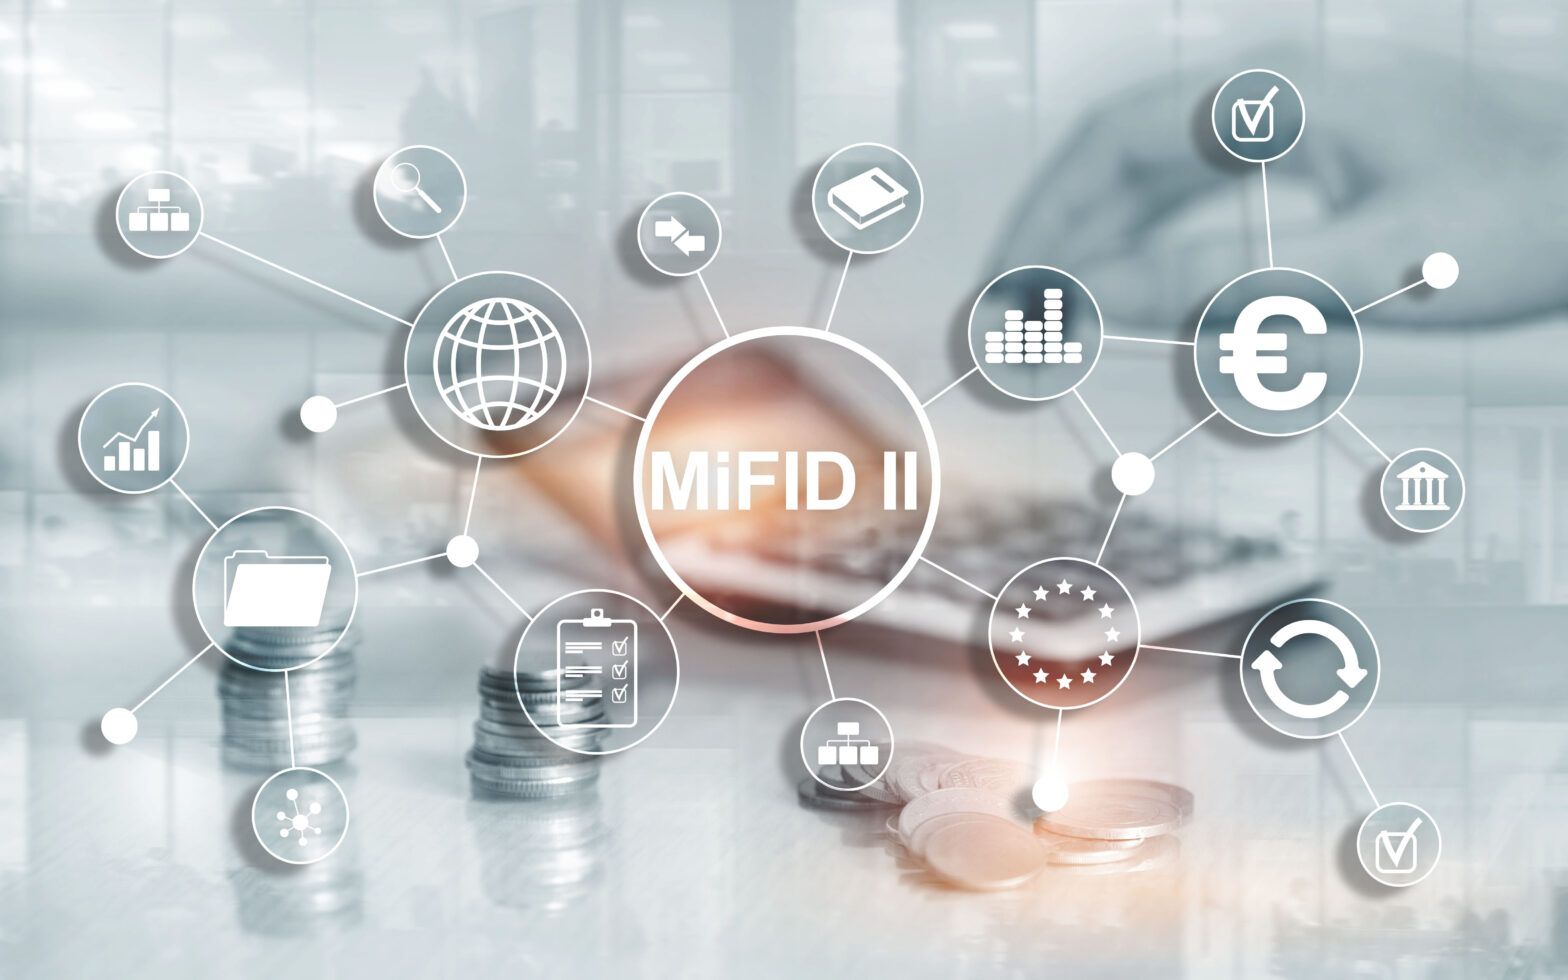 Mifid II sustainability requirements not understood by European wealth managers